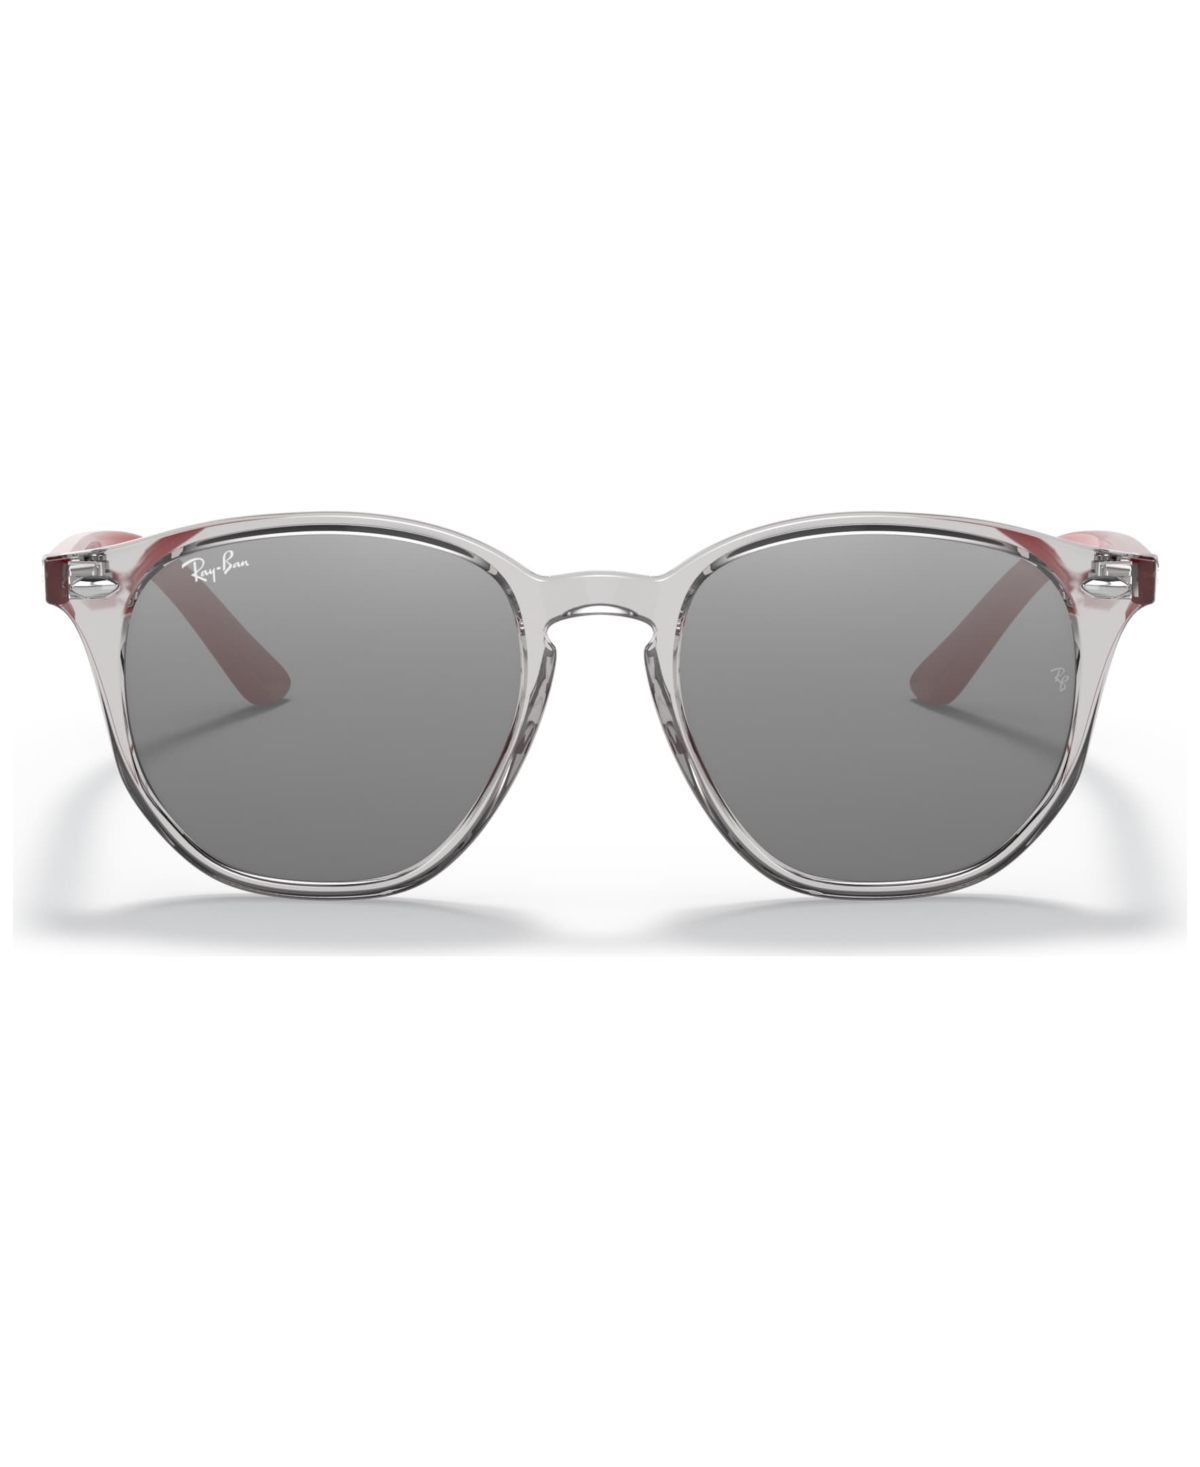 Ray-ban Jr . Kids Sunglasses, Rj9070 (ages 7-10) In Transparent Grey,grey Mirror Silver